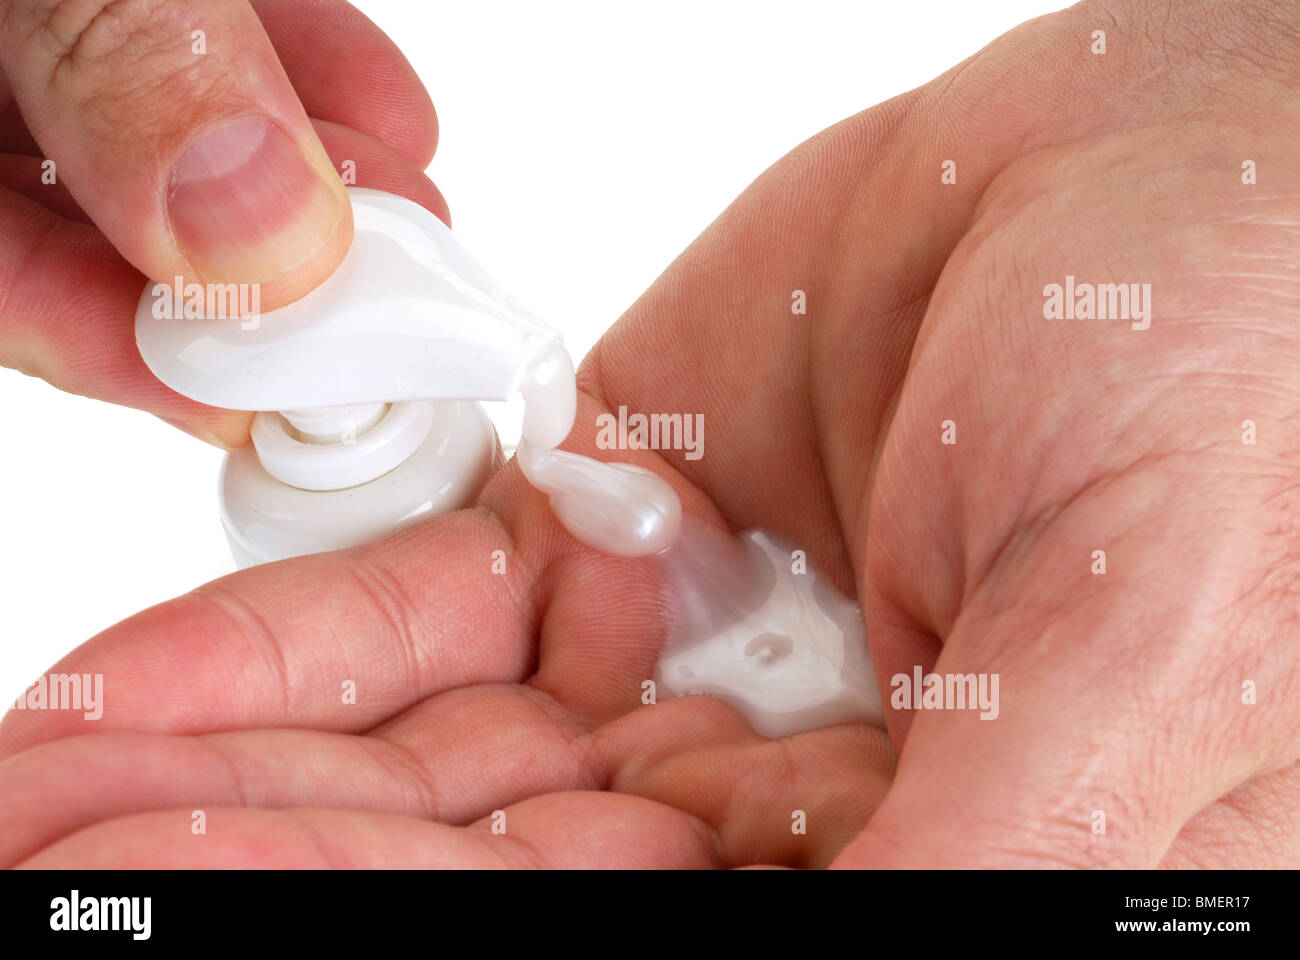 Person is washing hands with antibacterial soap Stock Photo